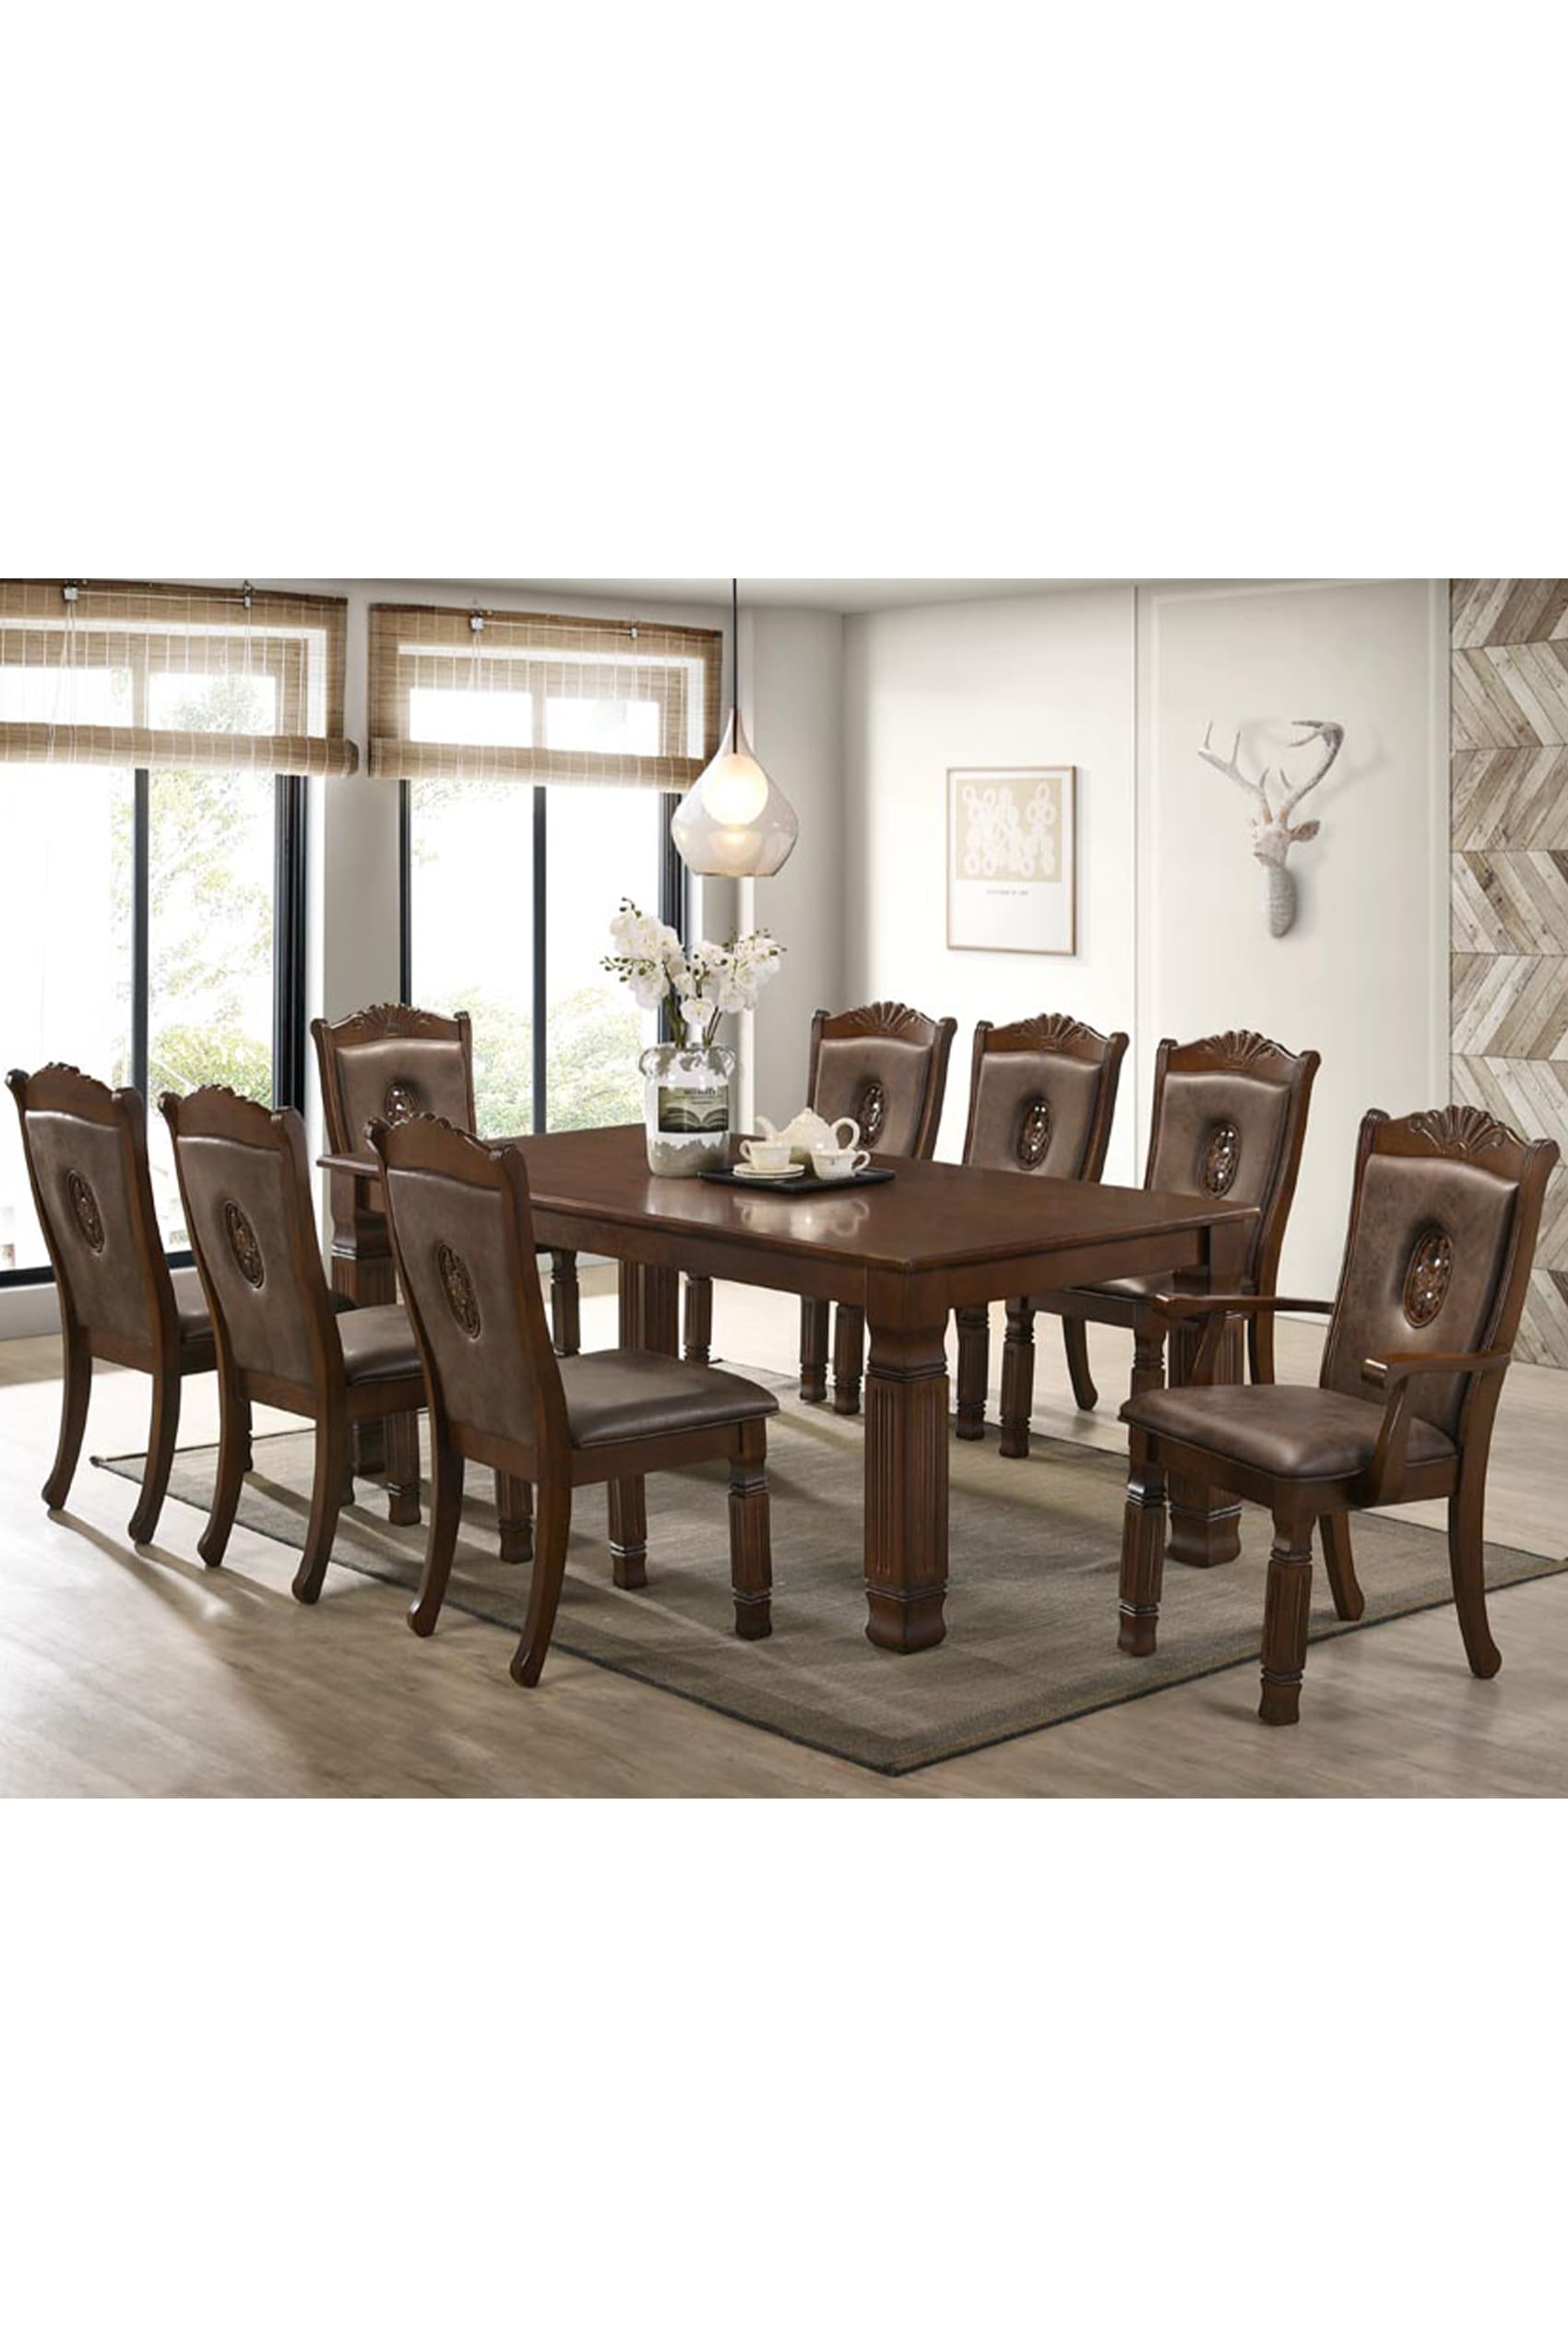 Fabrizia Dining Table + 6 Ama Dining Chairs